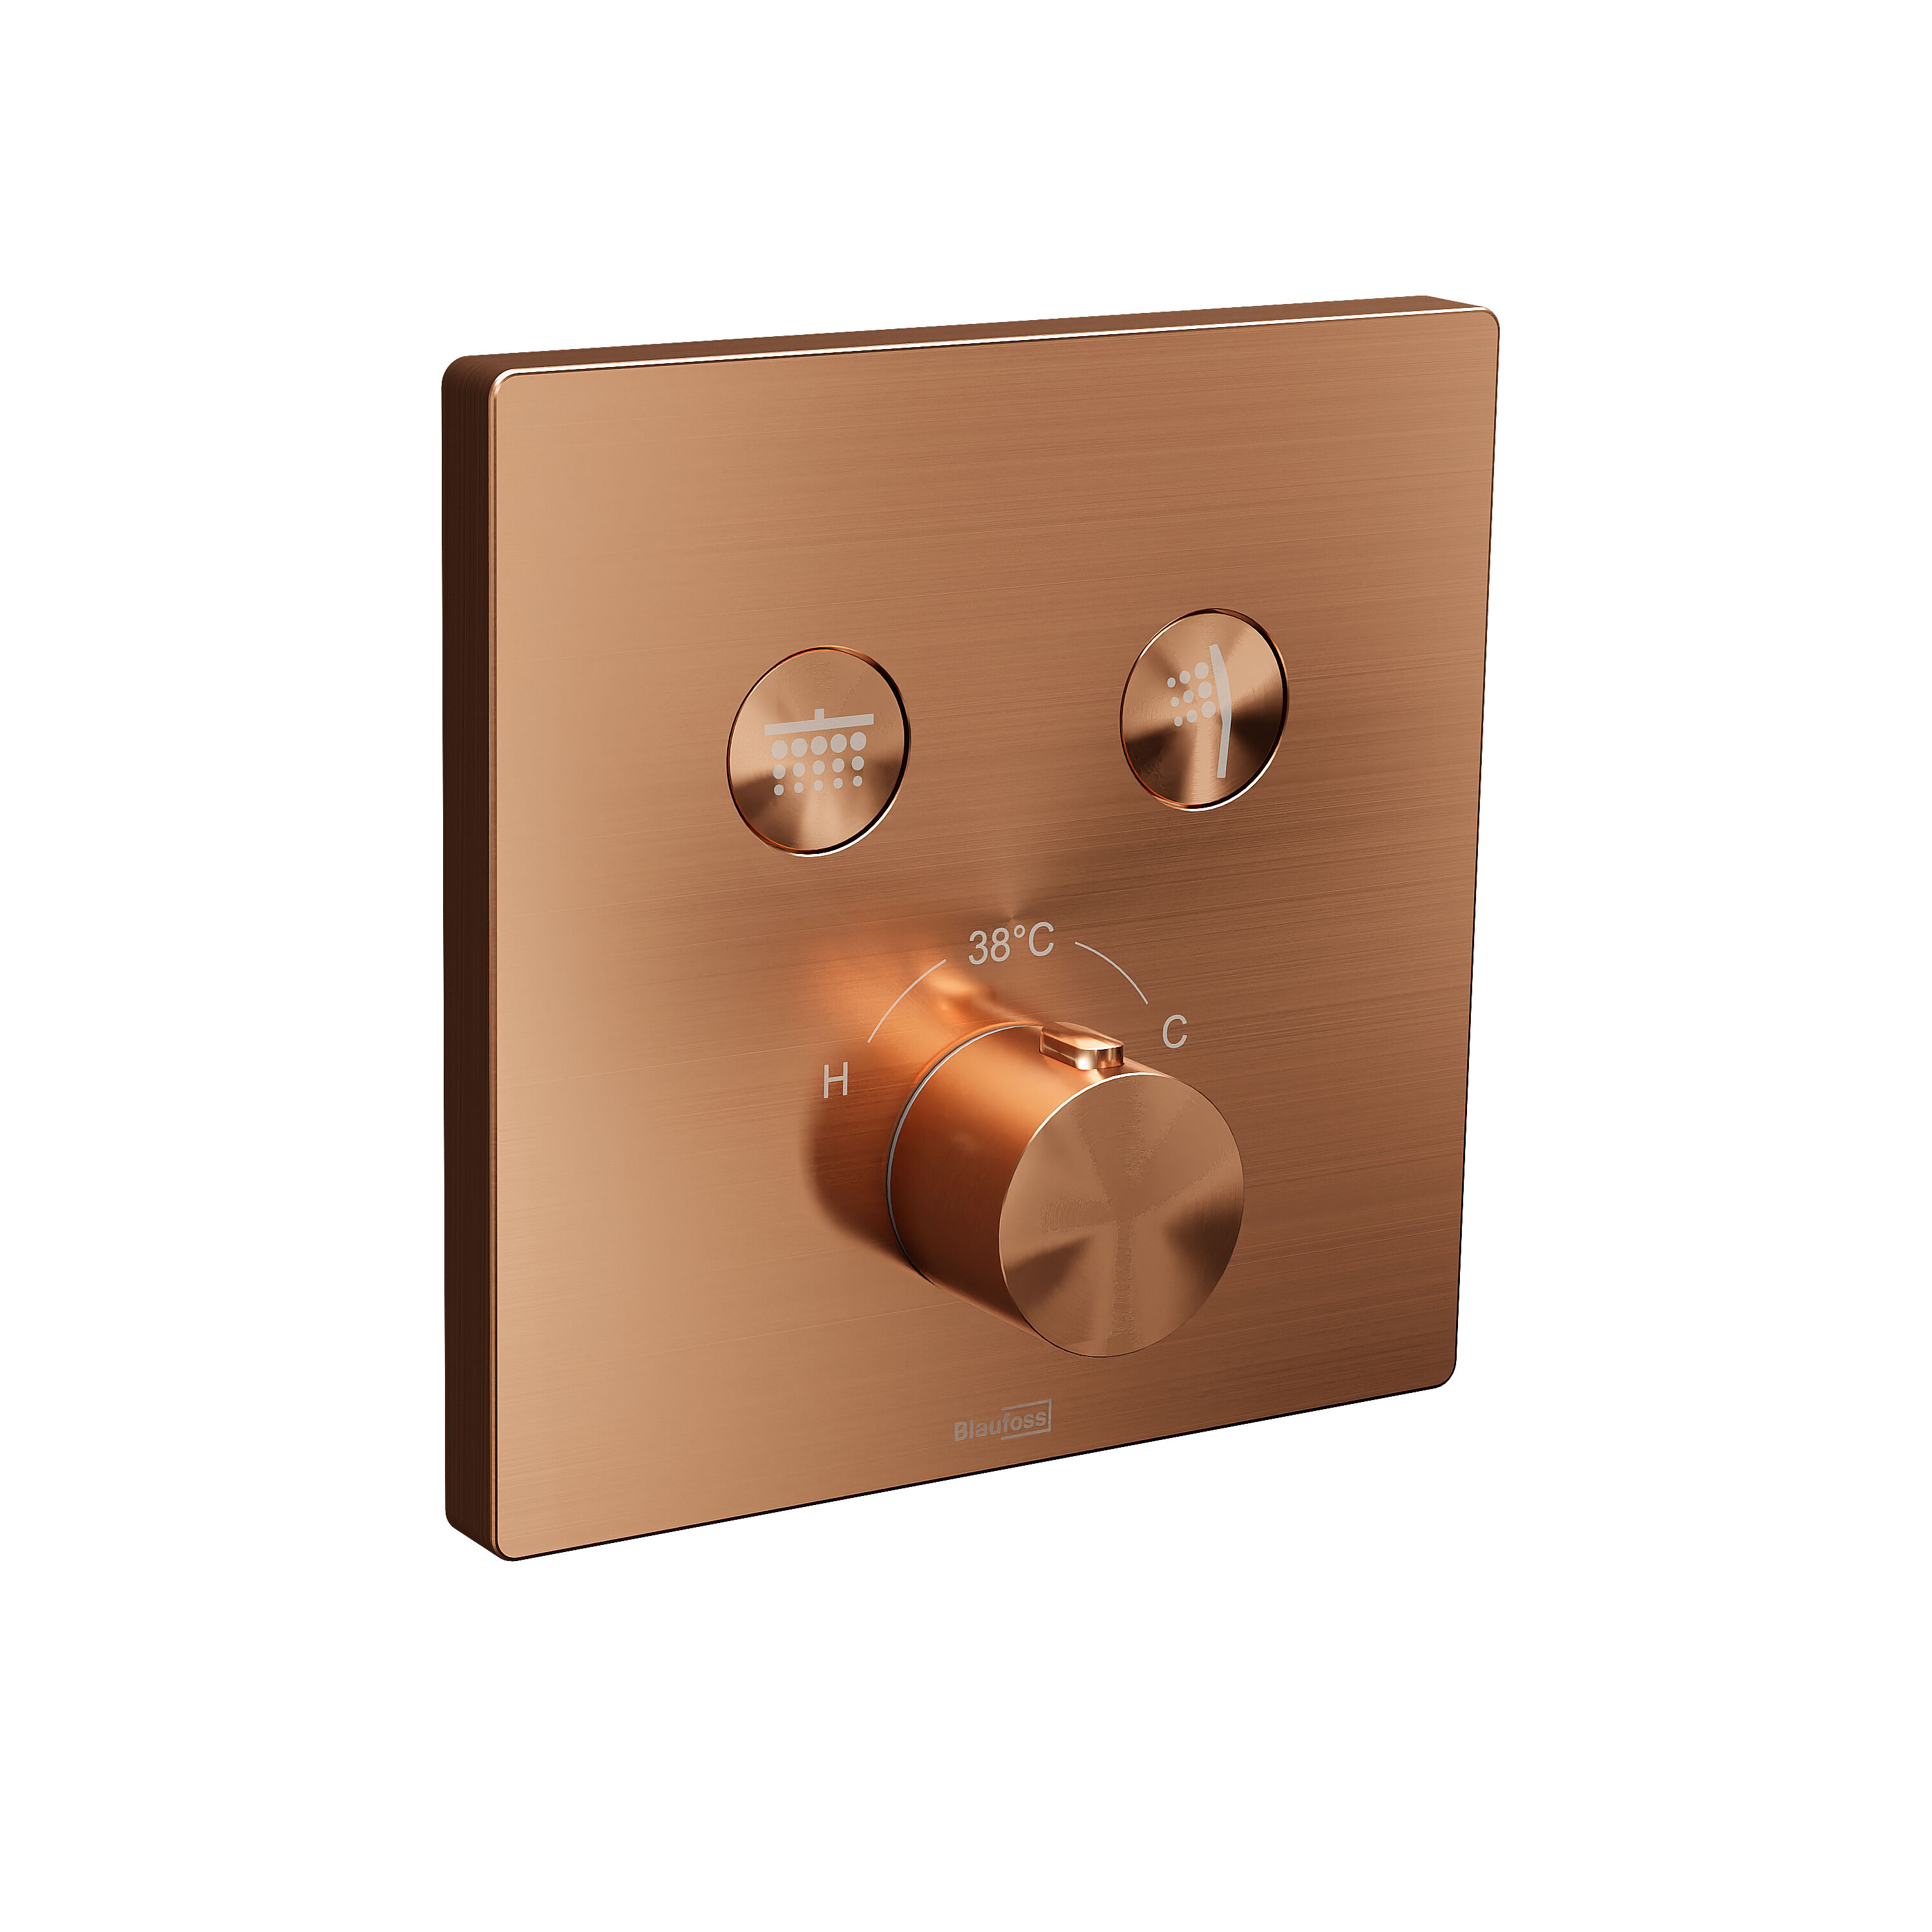 Blaufoss Smartbox Switch-Line inbouw thermostaat 2 uitgangen brushed rosegold